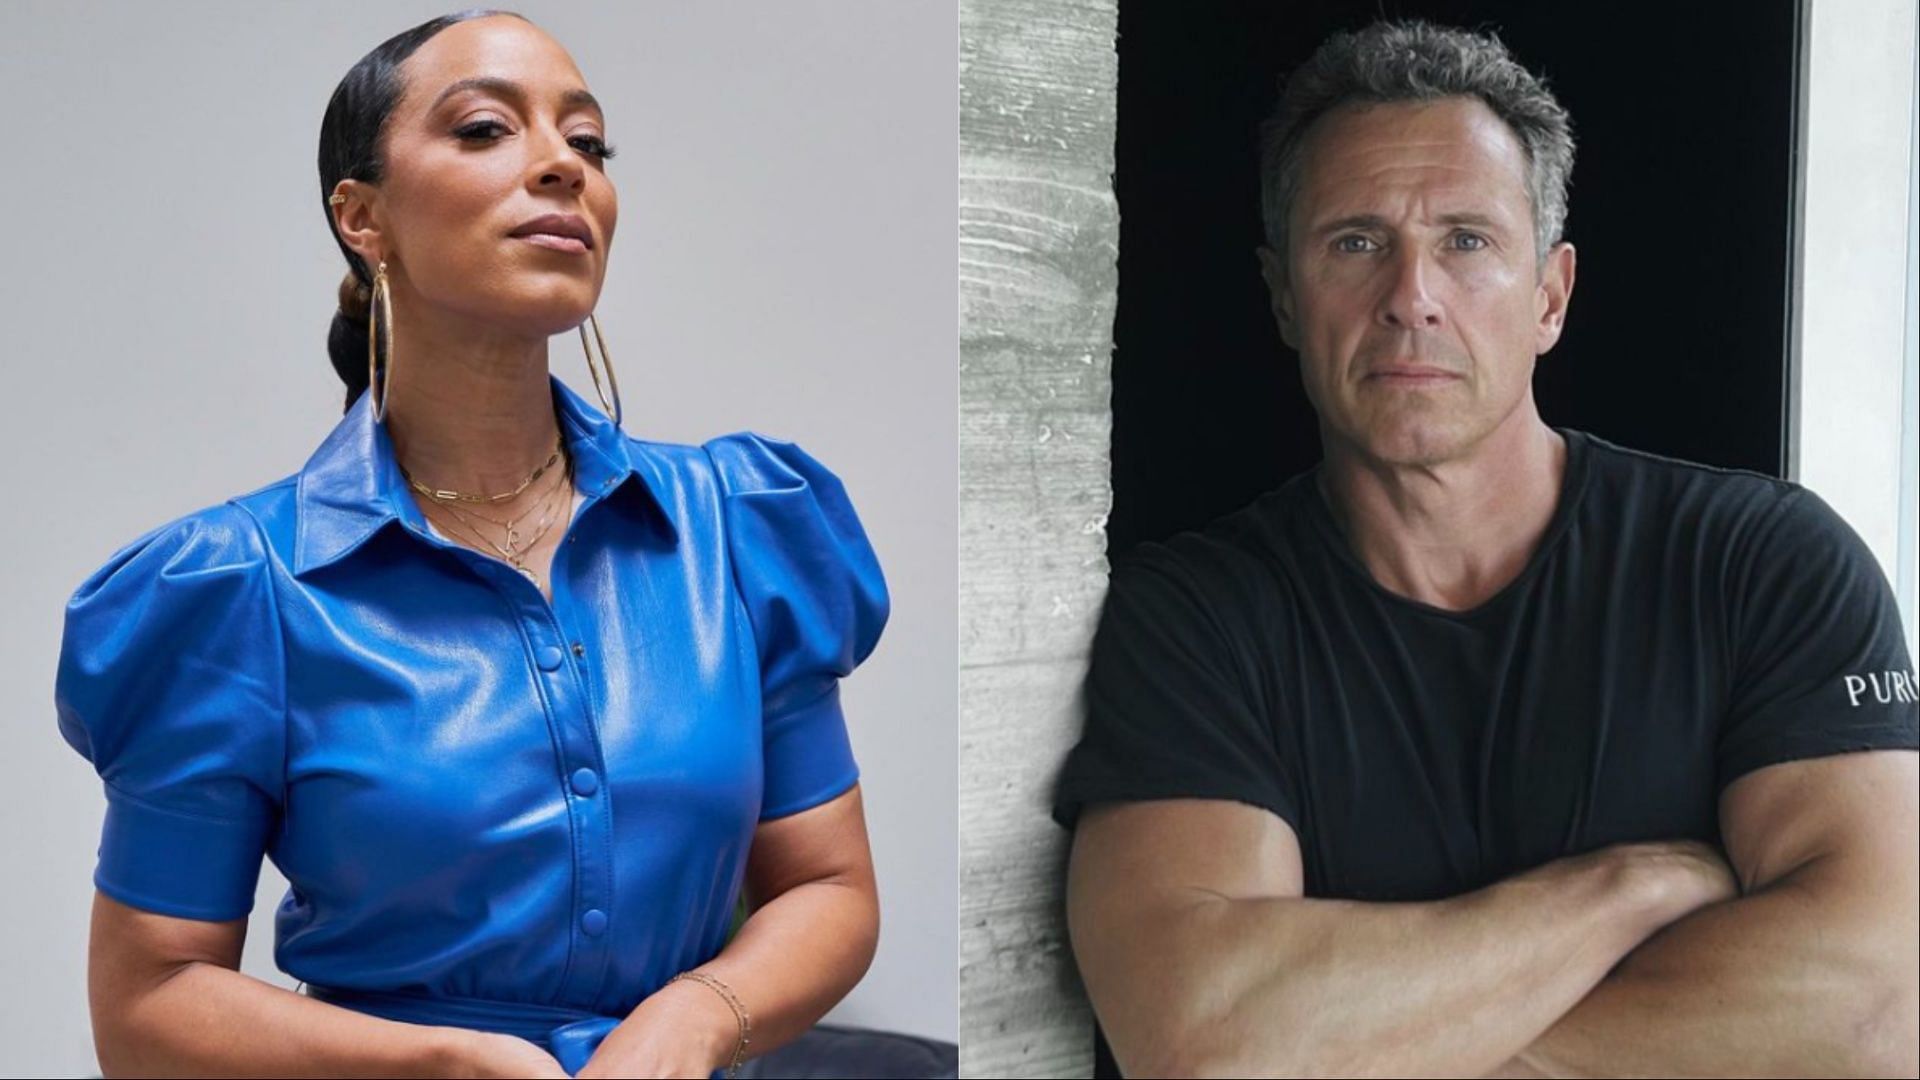 Angela Rye exposes Chris Cuomo for sending her explicit messages (Image via angelarye and  chrisccuomo/Instagram)